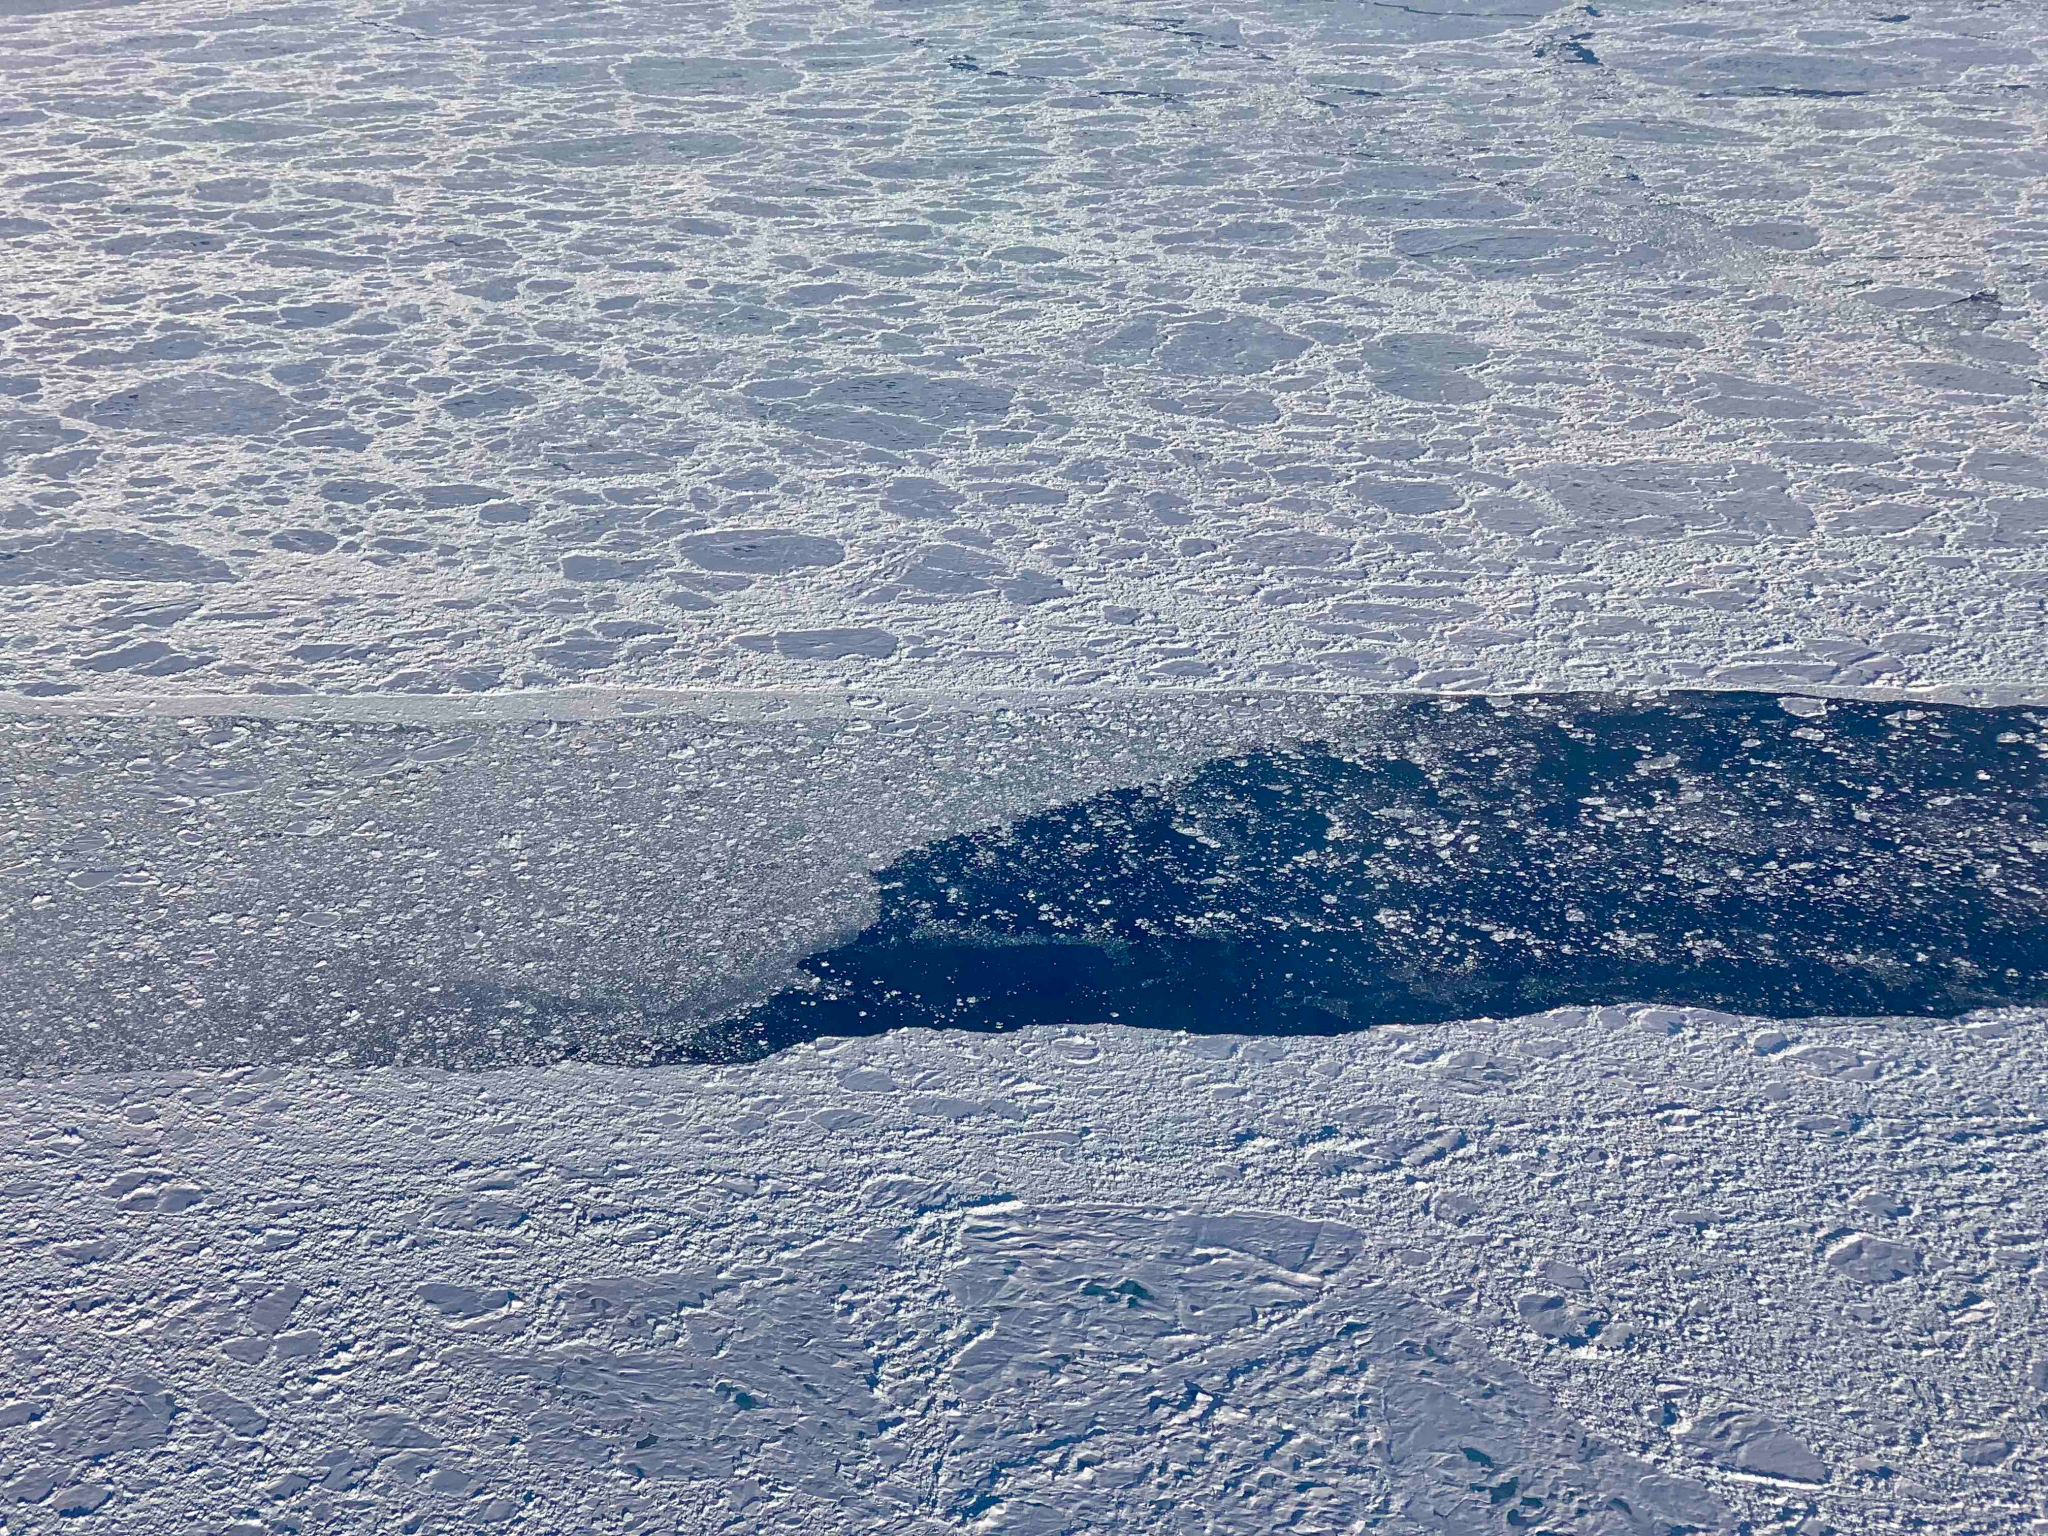 A photograph of sea ice floes with an open water lead running through them. The ice looks like an expanse of cracked light blue glass. In the center right of the image, dark blue open water peeks through, speckled with white ice chunks.